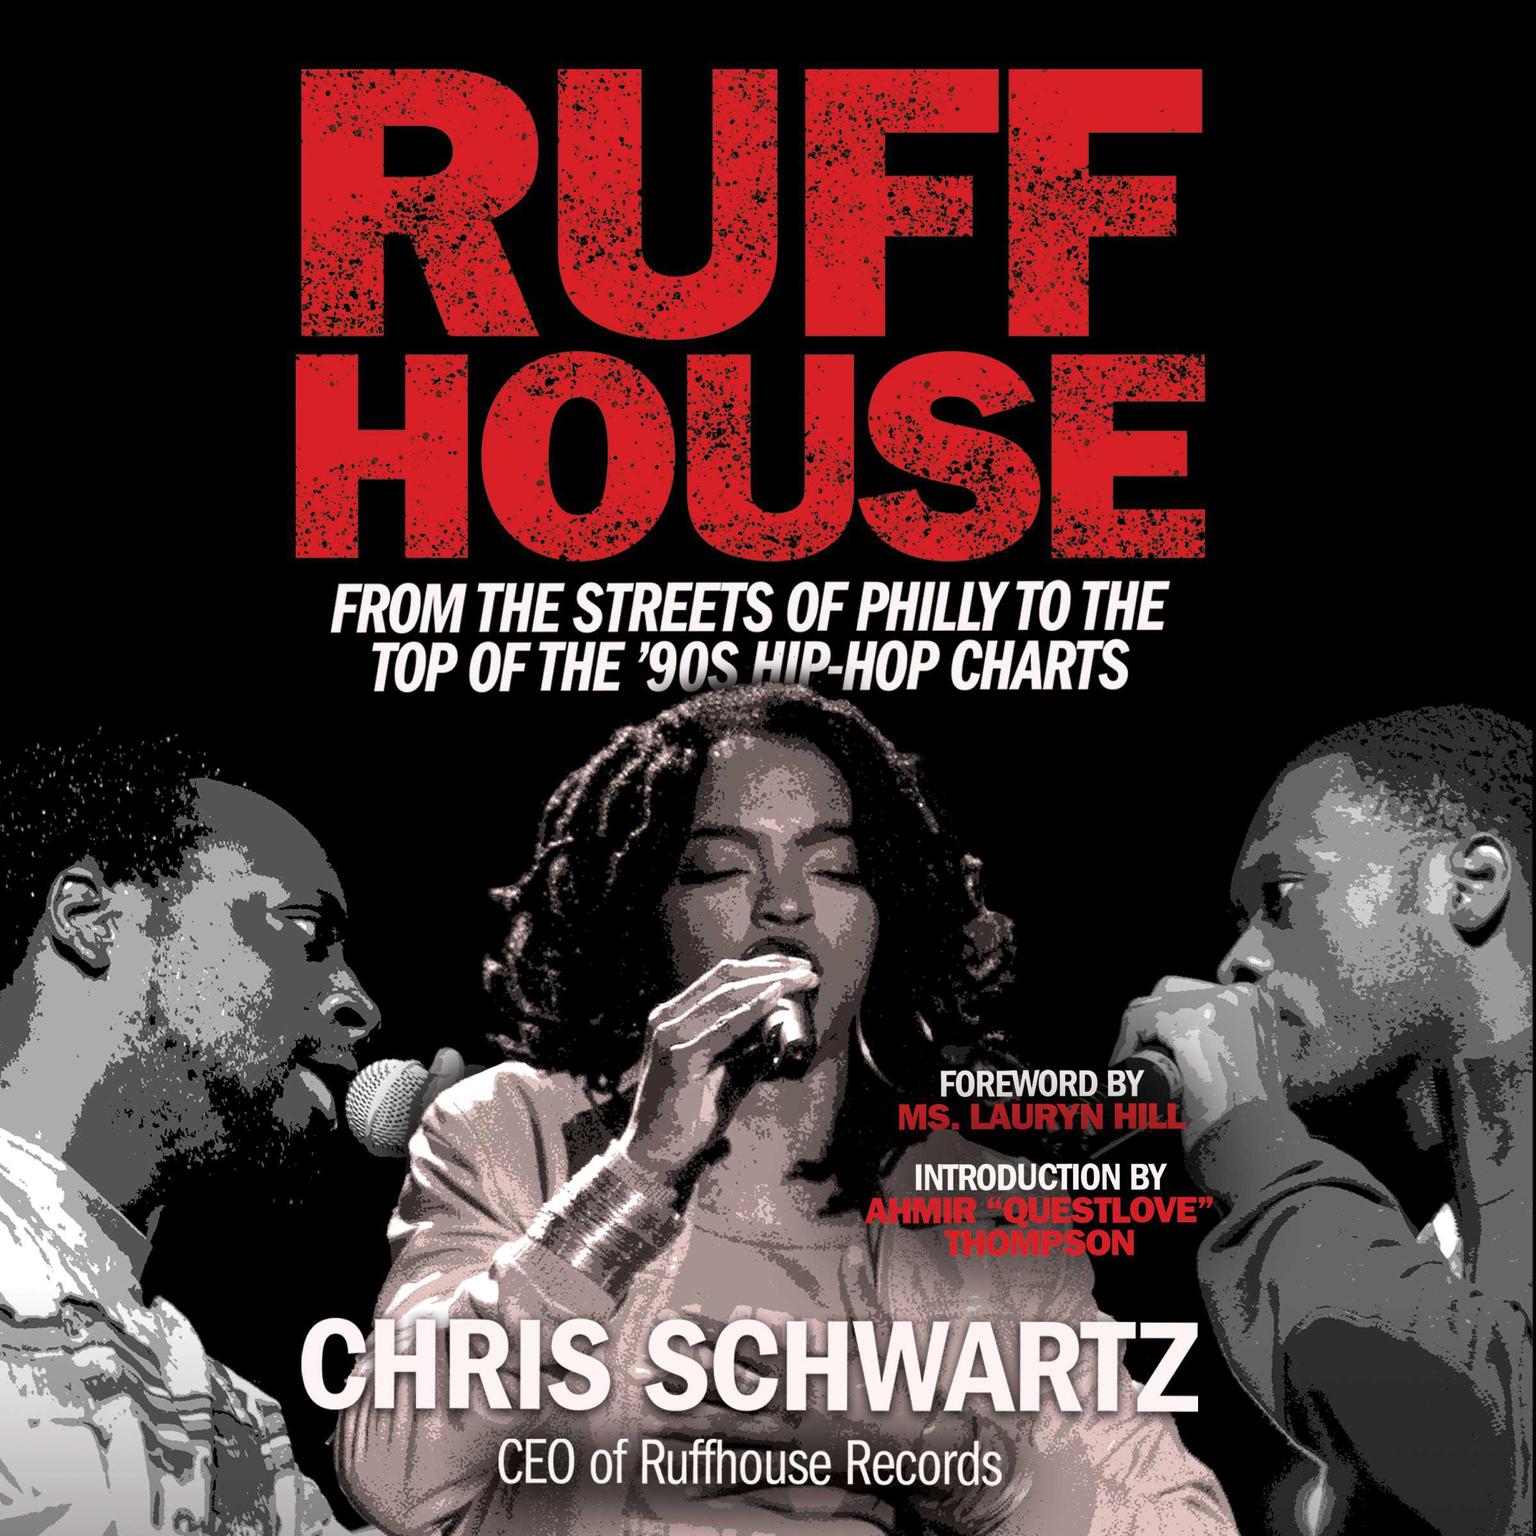 Ruffhouse: From the Streets of Philly to the Top of the 90s Hip-Hop Charts Audiobook, by Chris Schwartz